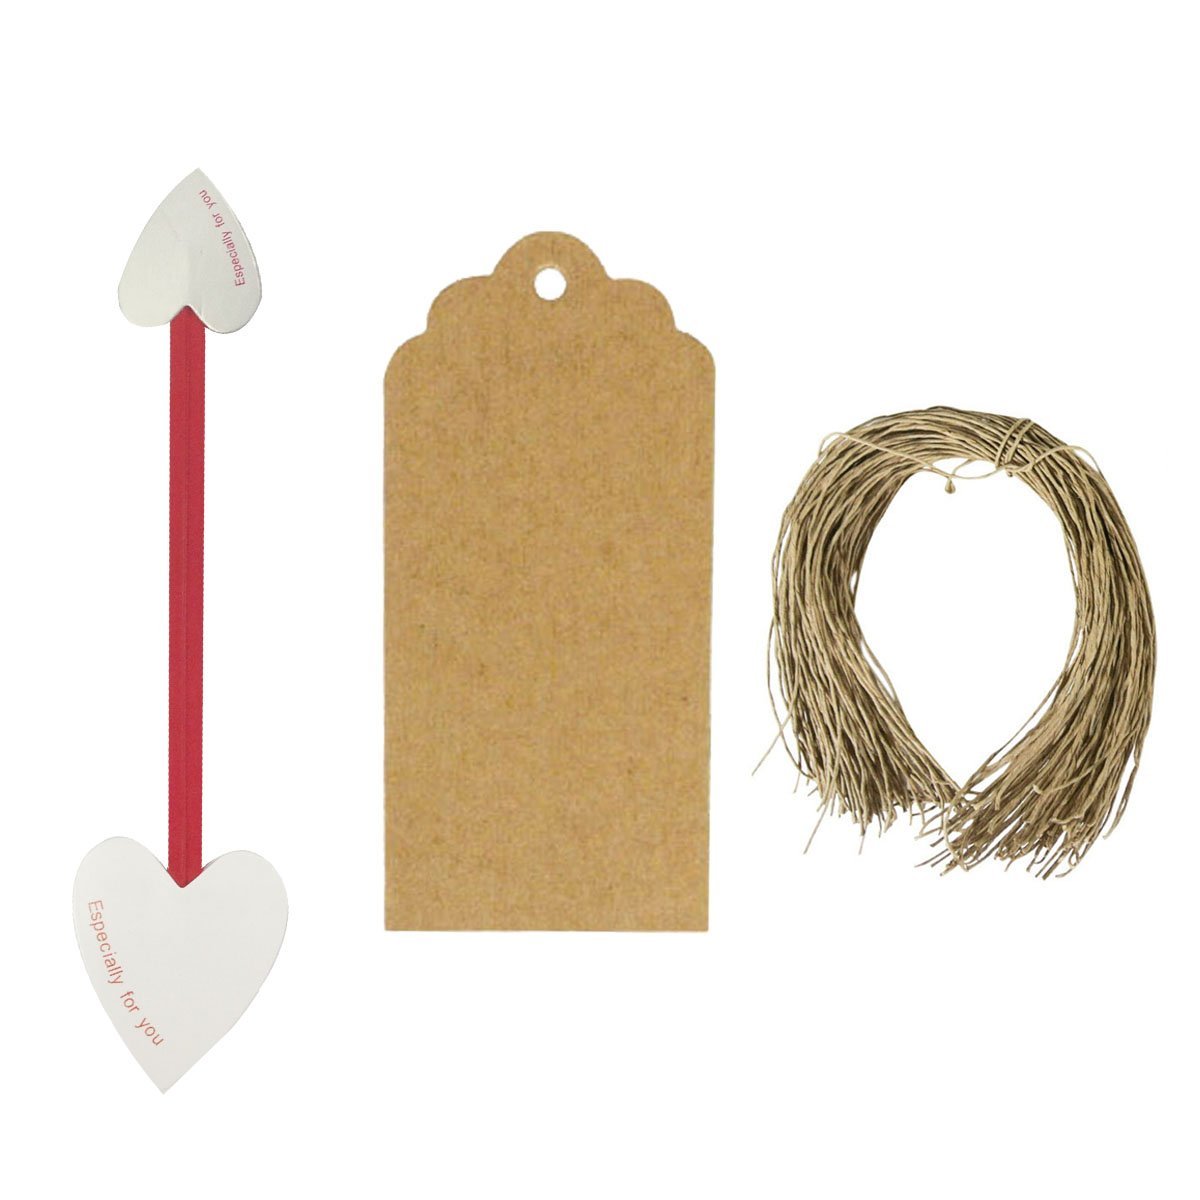 Wrapables Set of 50 Heart Twist Ties with 20 Scalloped Gift Tags